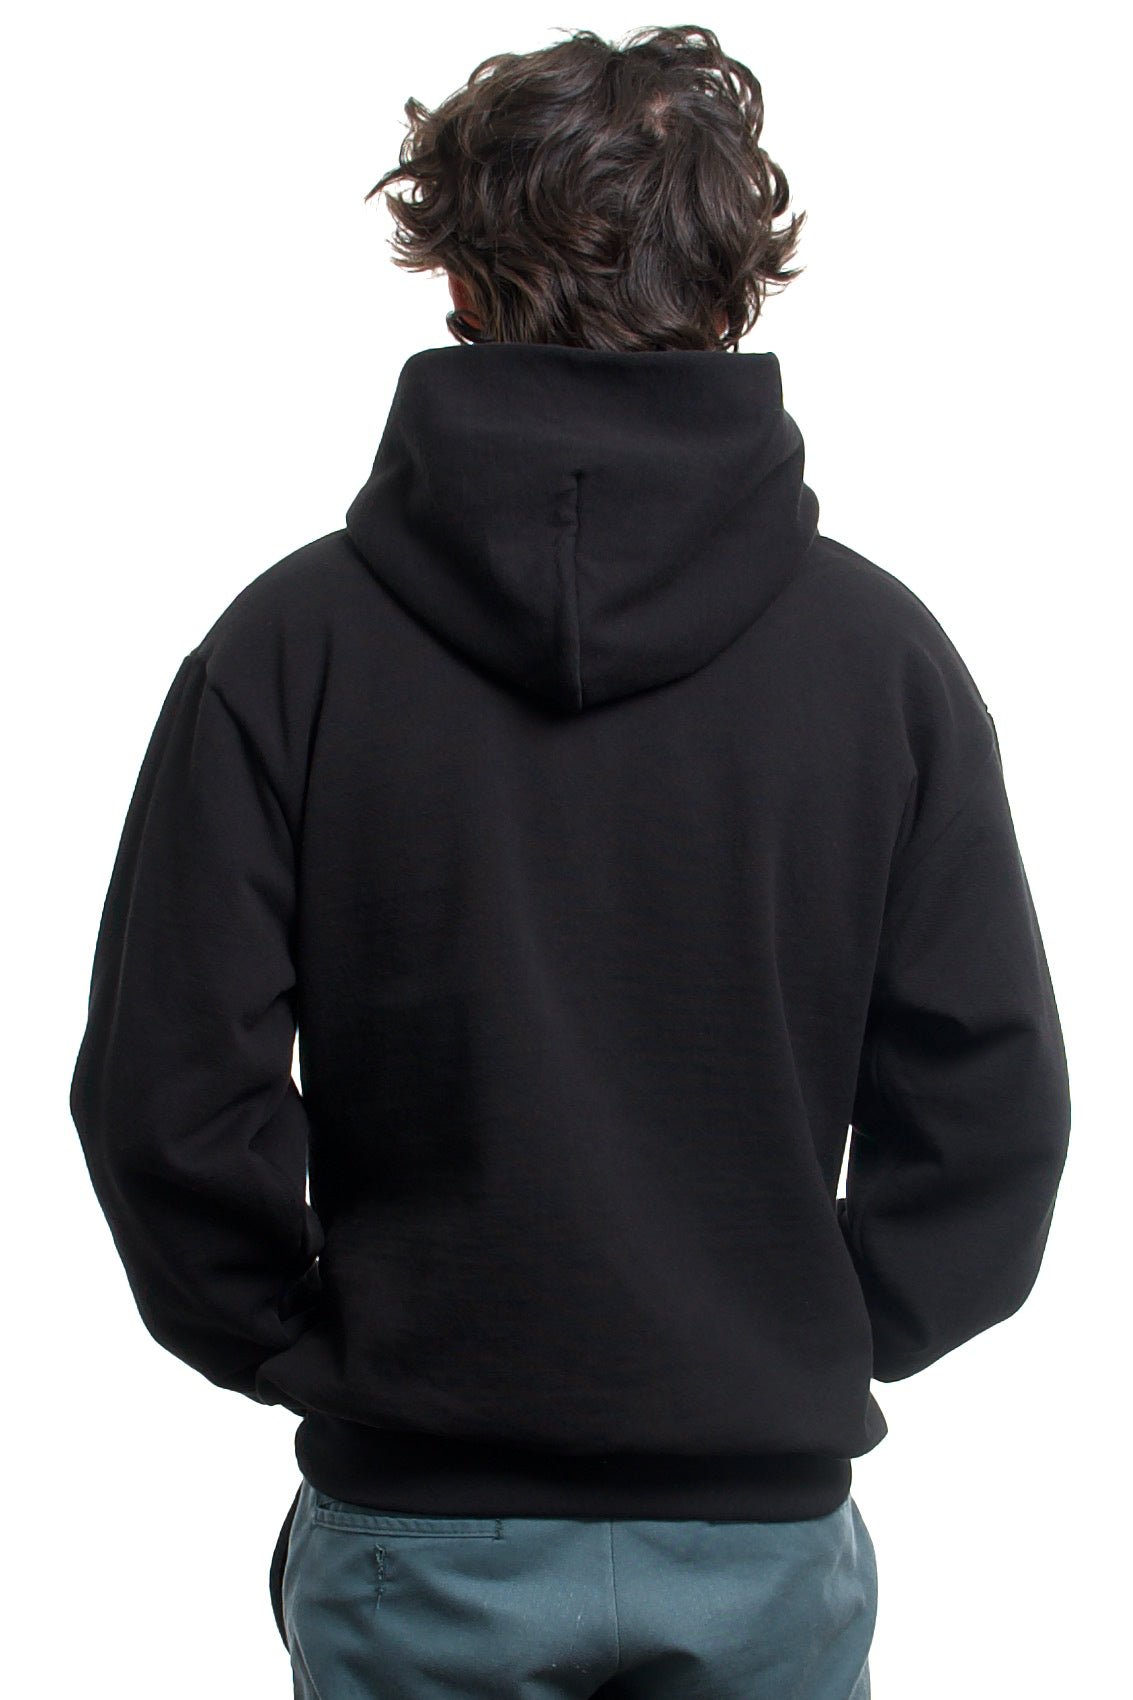 100% Electronica - 100% Electronica Hoodie - Black - 100% Electronica Official Store (Photo 2)